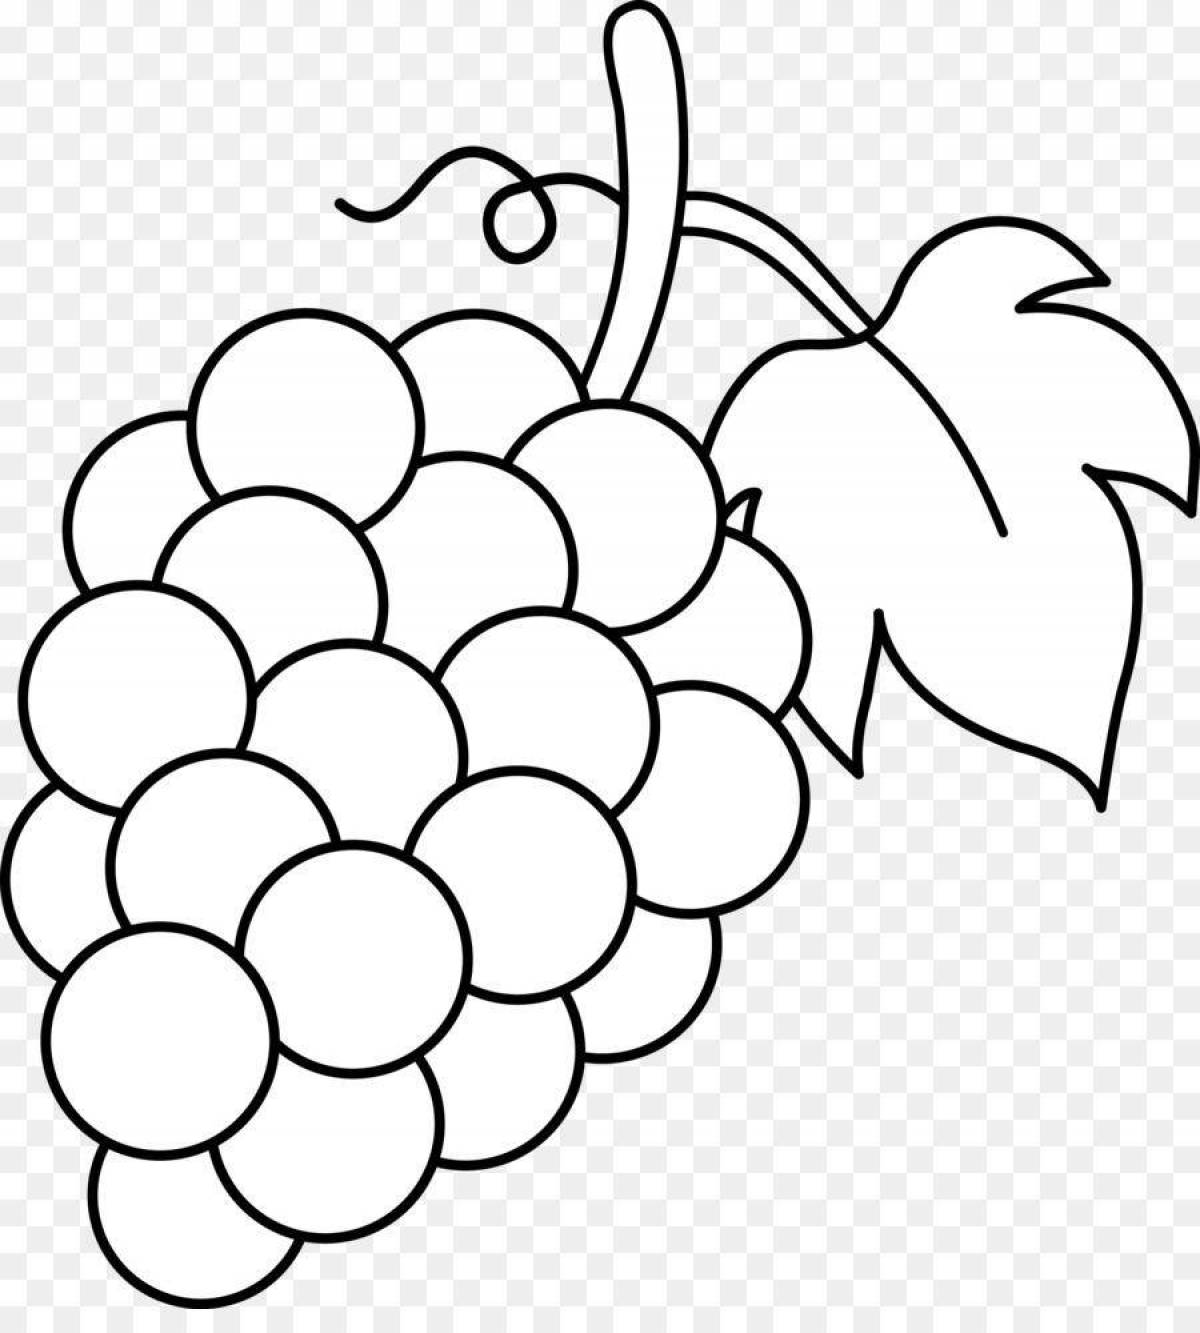 Coloring grapes in bloom for children